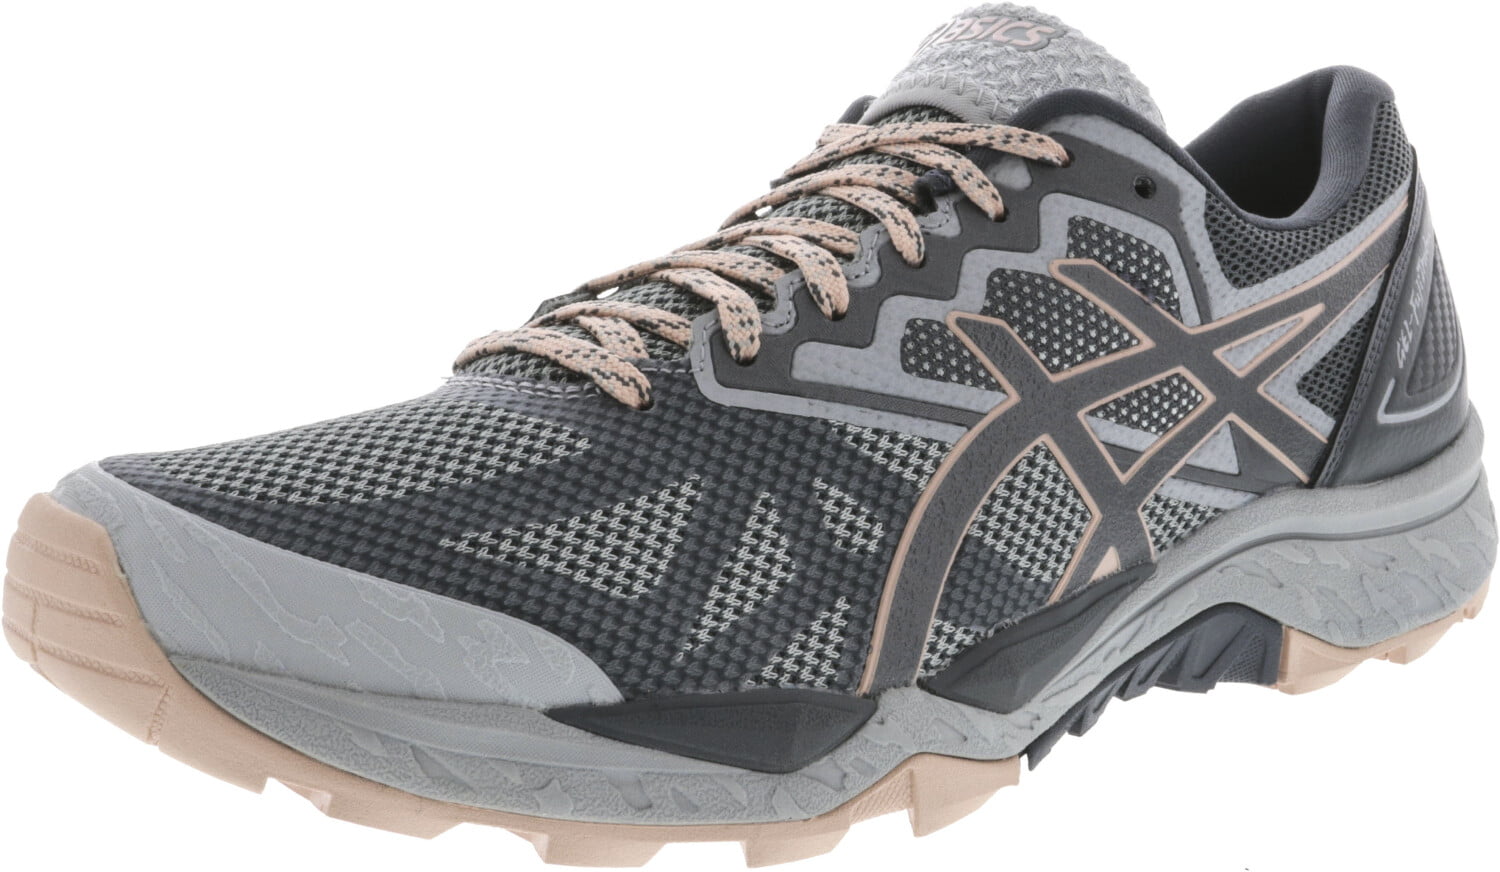 Asics Women's Gel-Fujitrabuco 6 Mid Grey / Carbon Evening Sand Ankle-High - 5.5M -